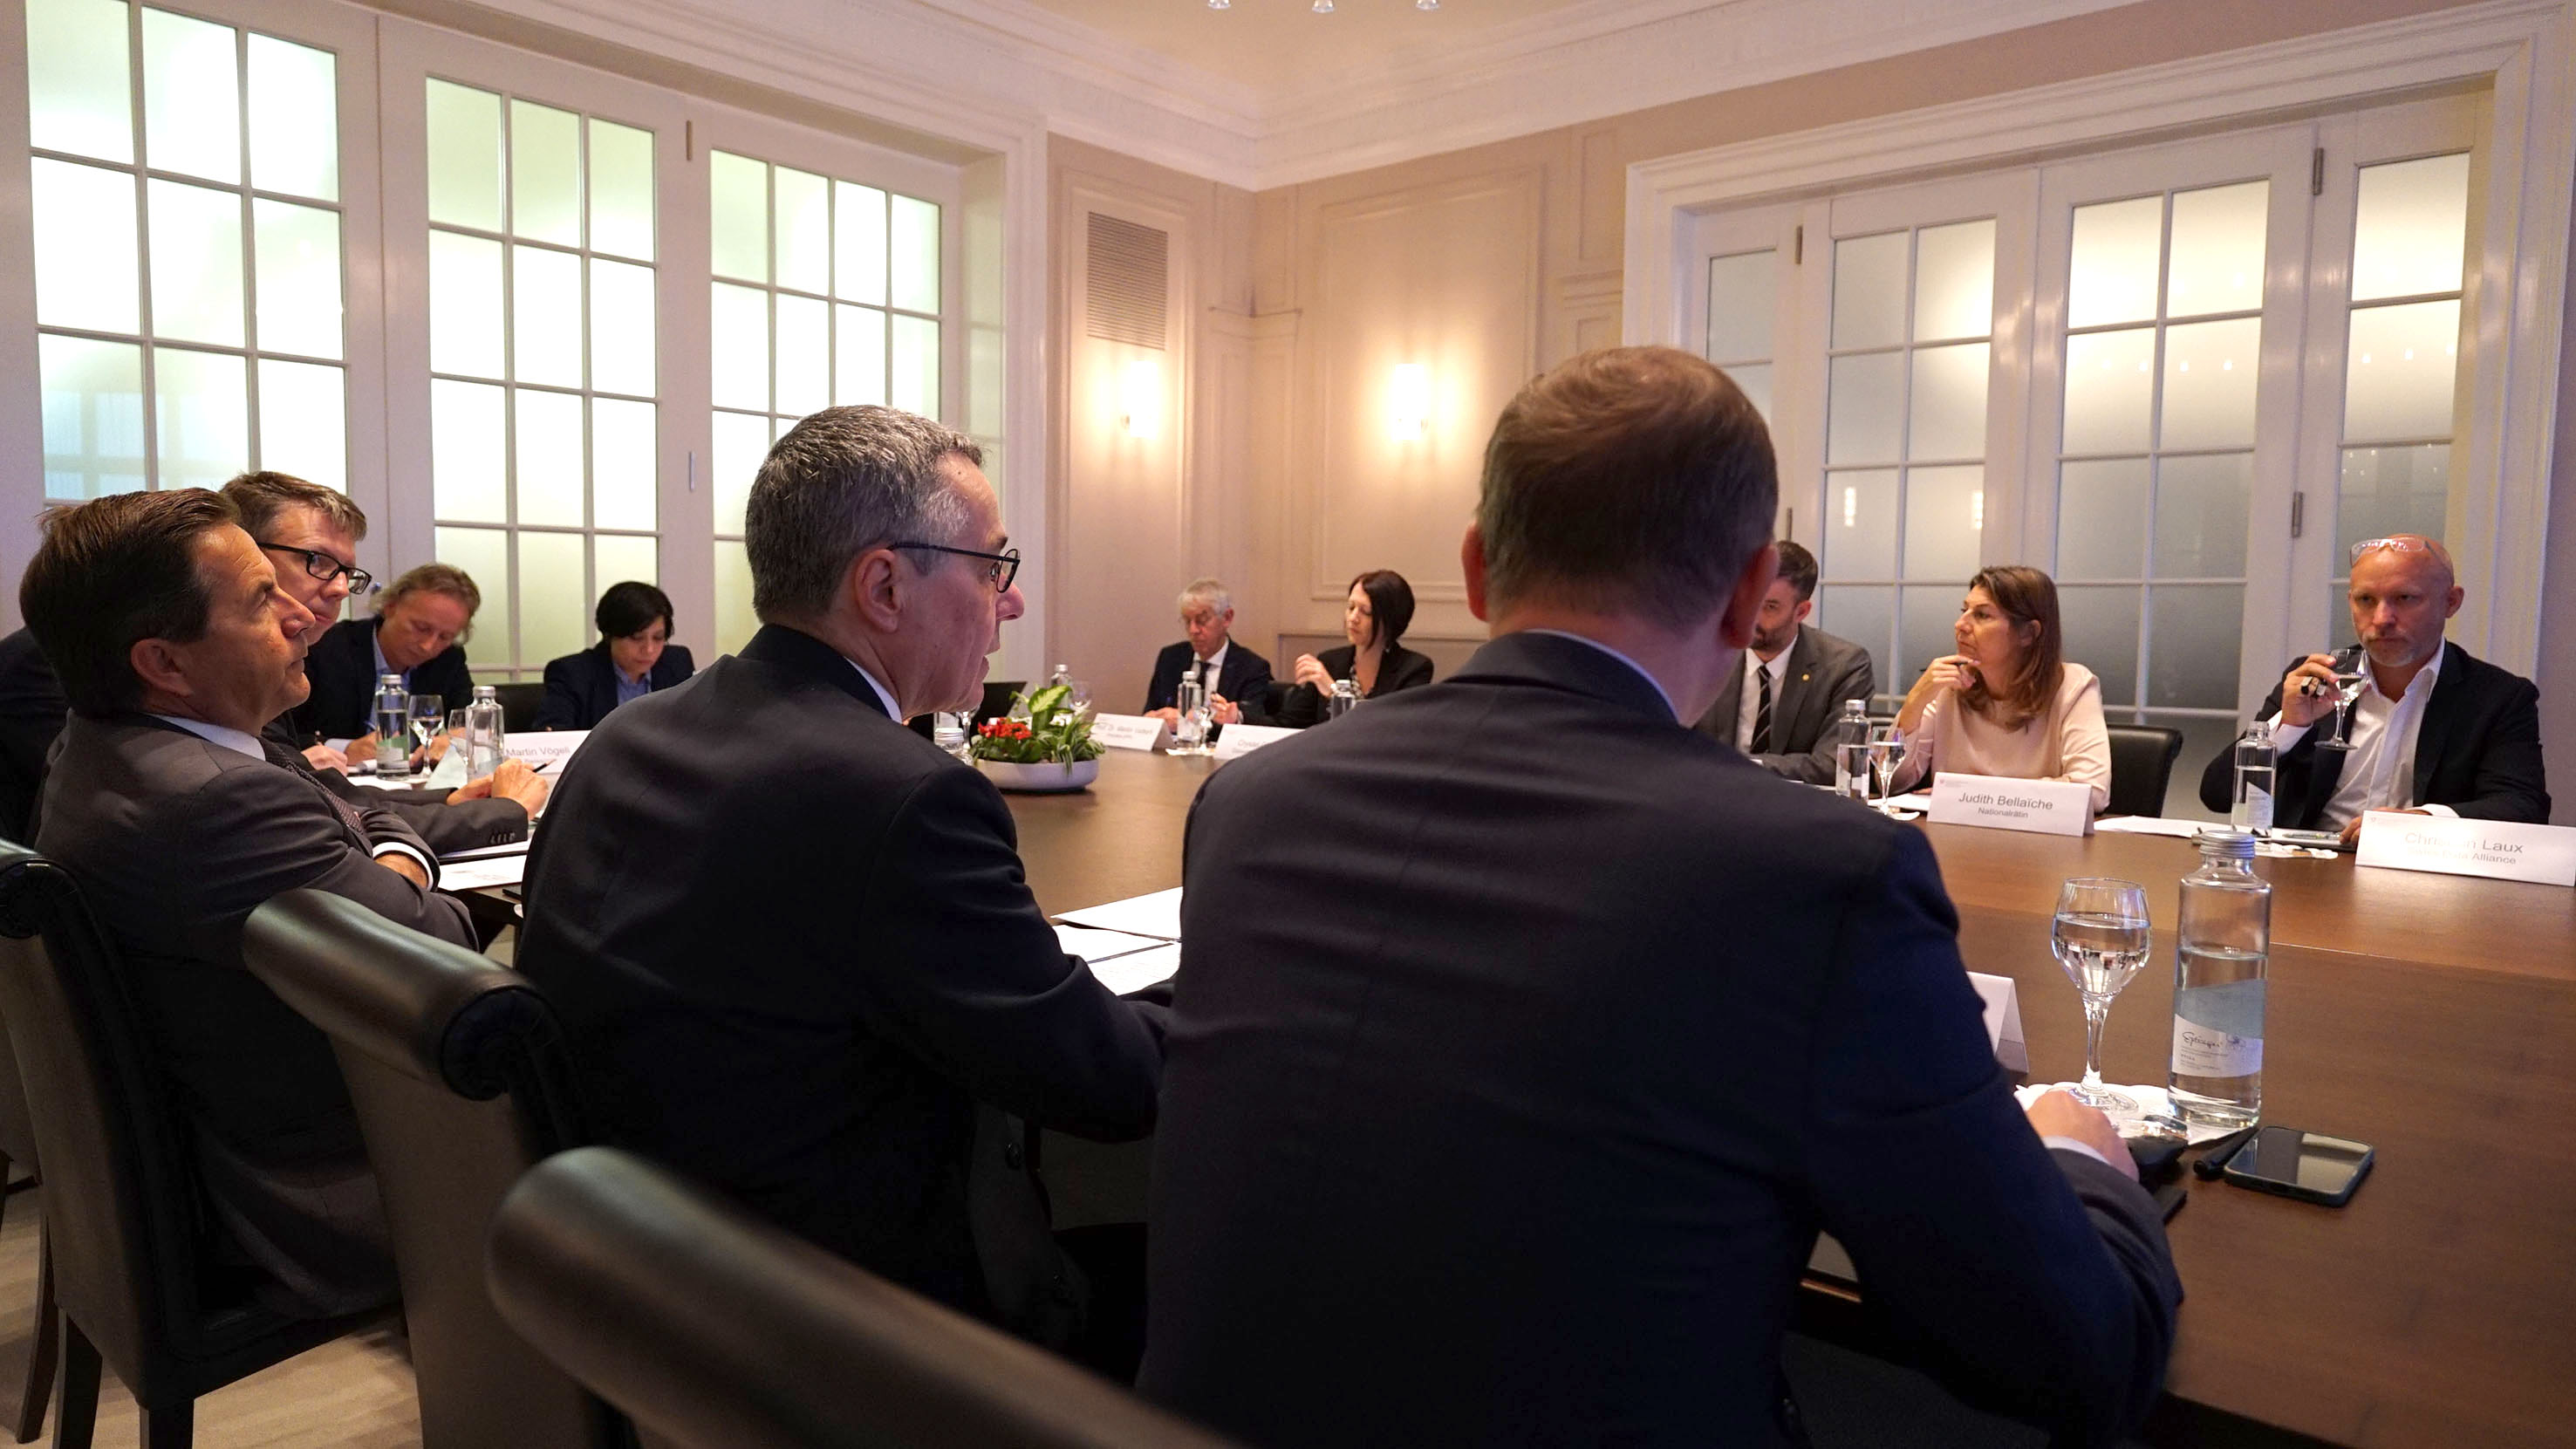 What can we do to promote digital sovereignty? That was the question addressed by the Digital Switzerland Advisory Committee chaired by Federal Councillor Ignazio Cassis. Digital sovereignty is a focus theme of the Digital Switzerland Strategy.